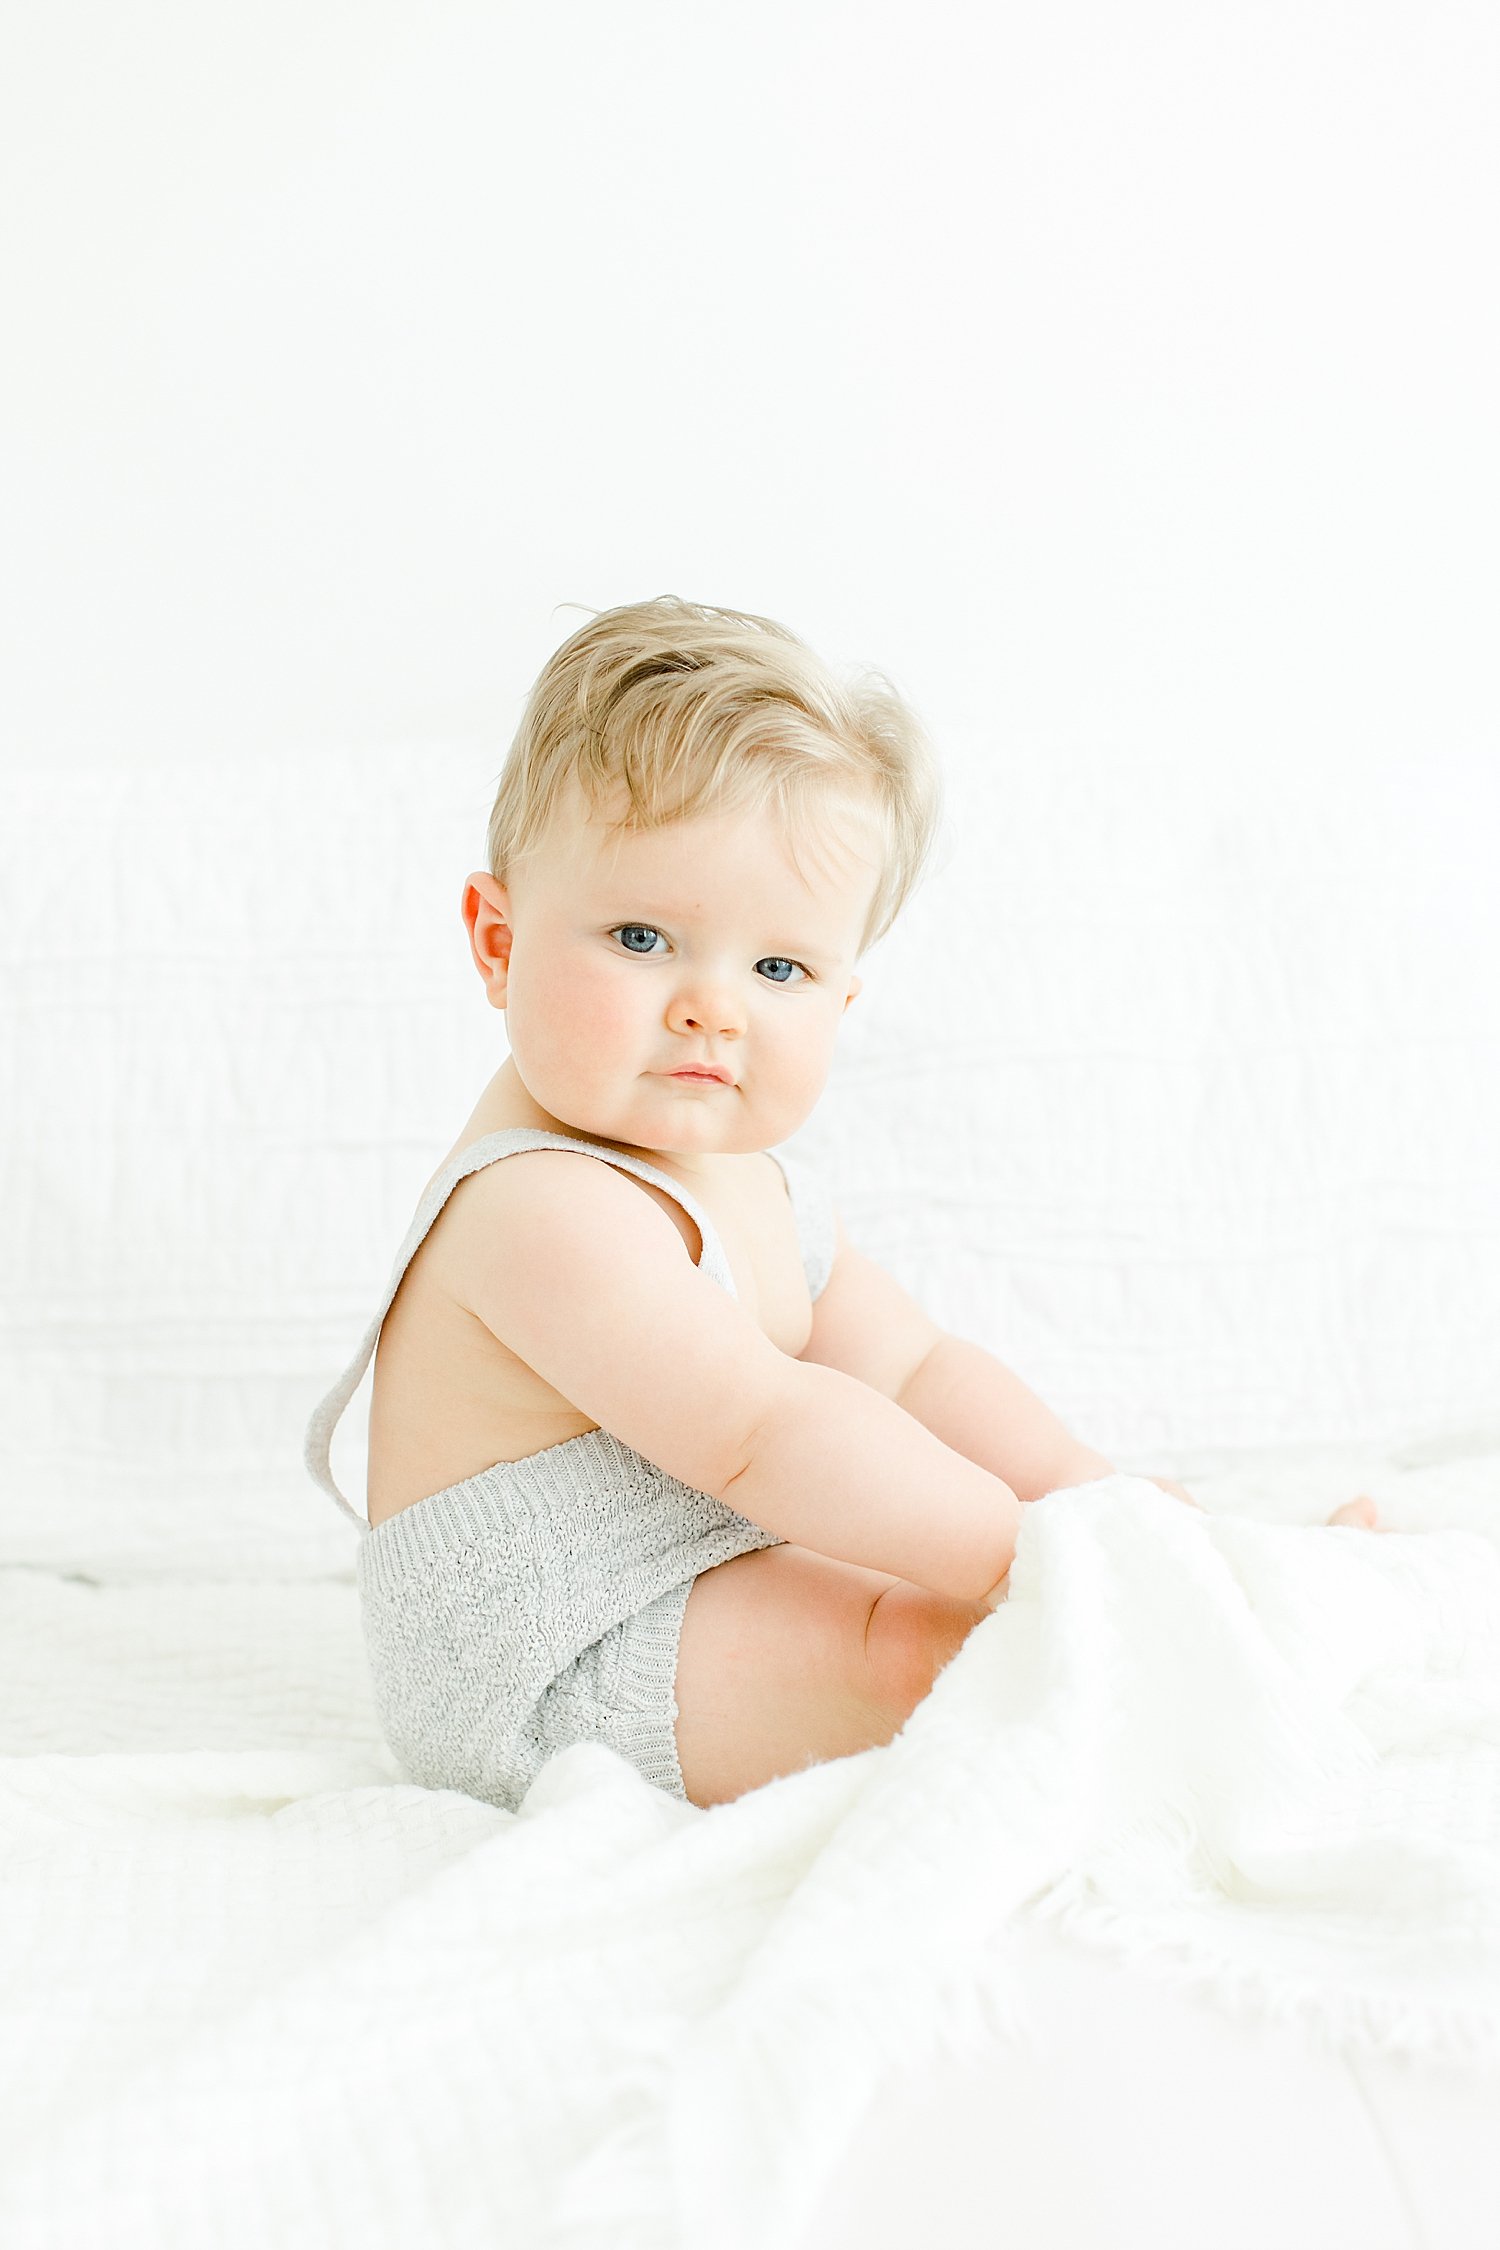 Six month old sitter milestone session in Westport studio with Kristin Wood Photography.